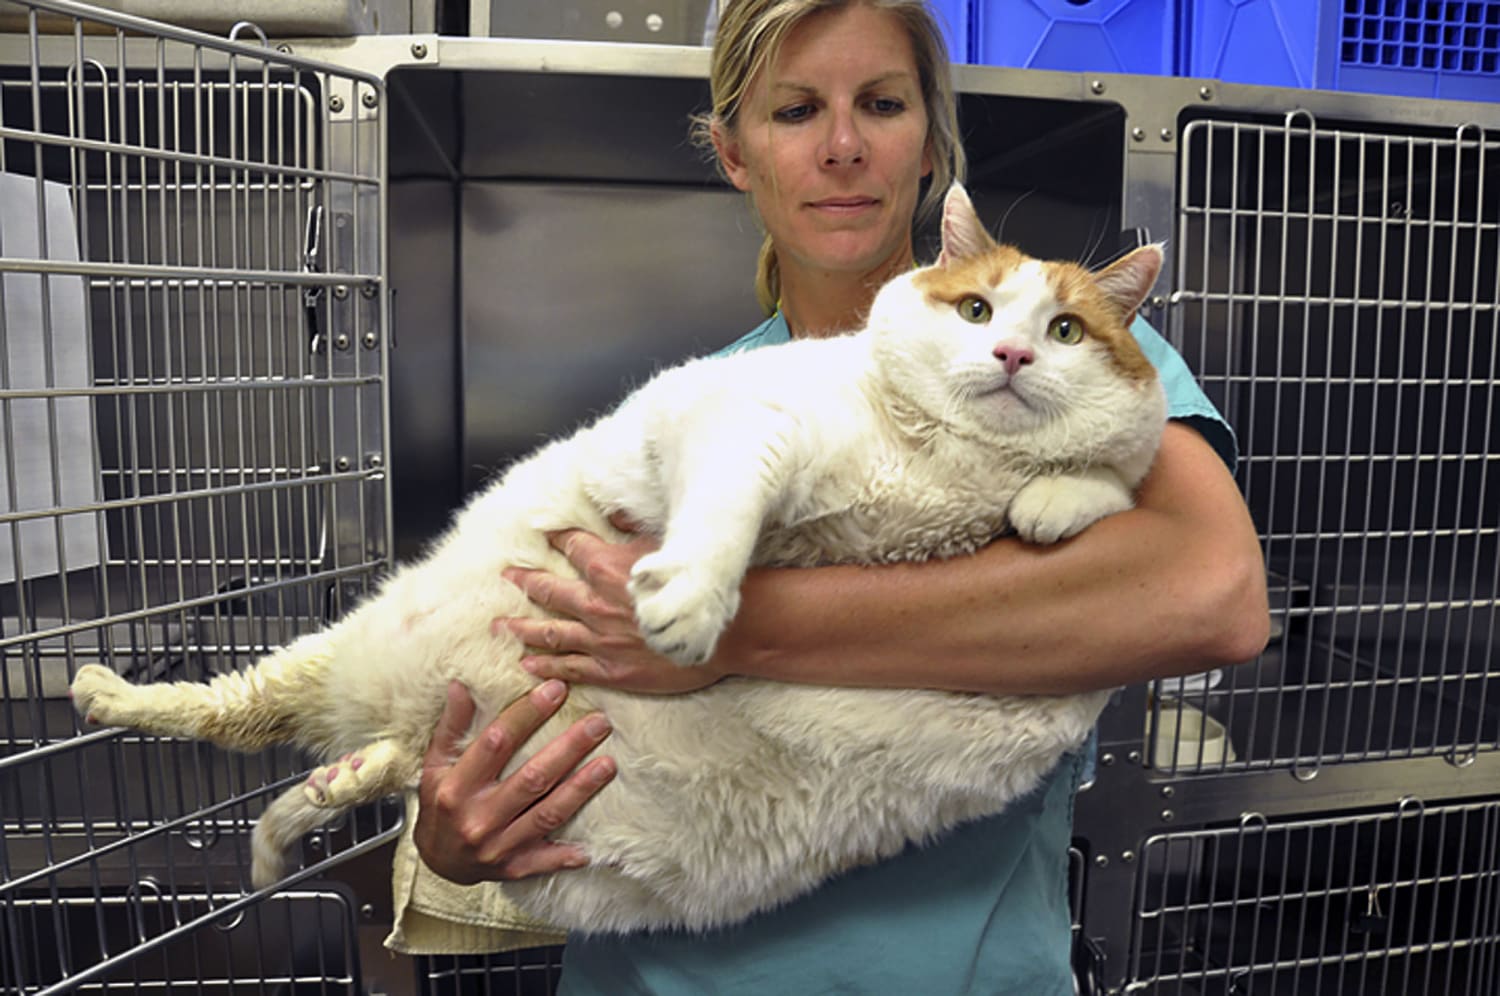 Why do we love fat cats and dogs but discriminate against fat people?